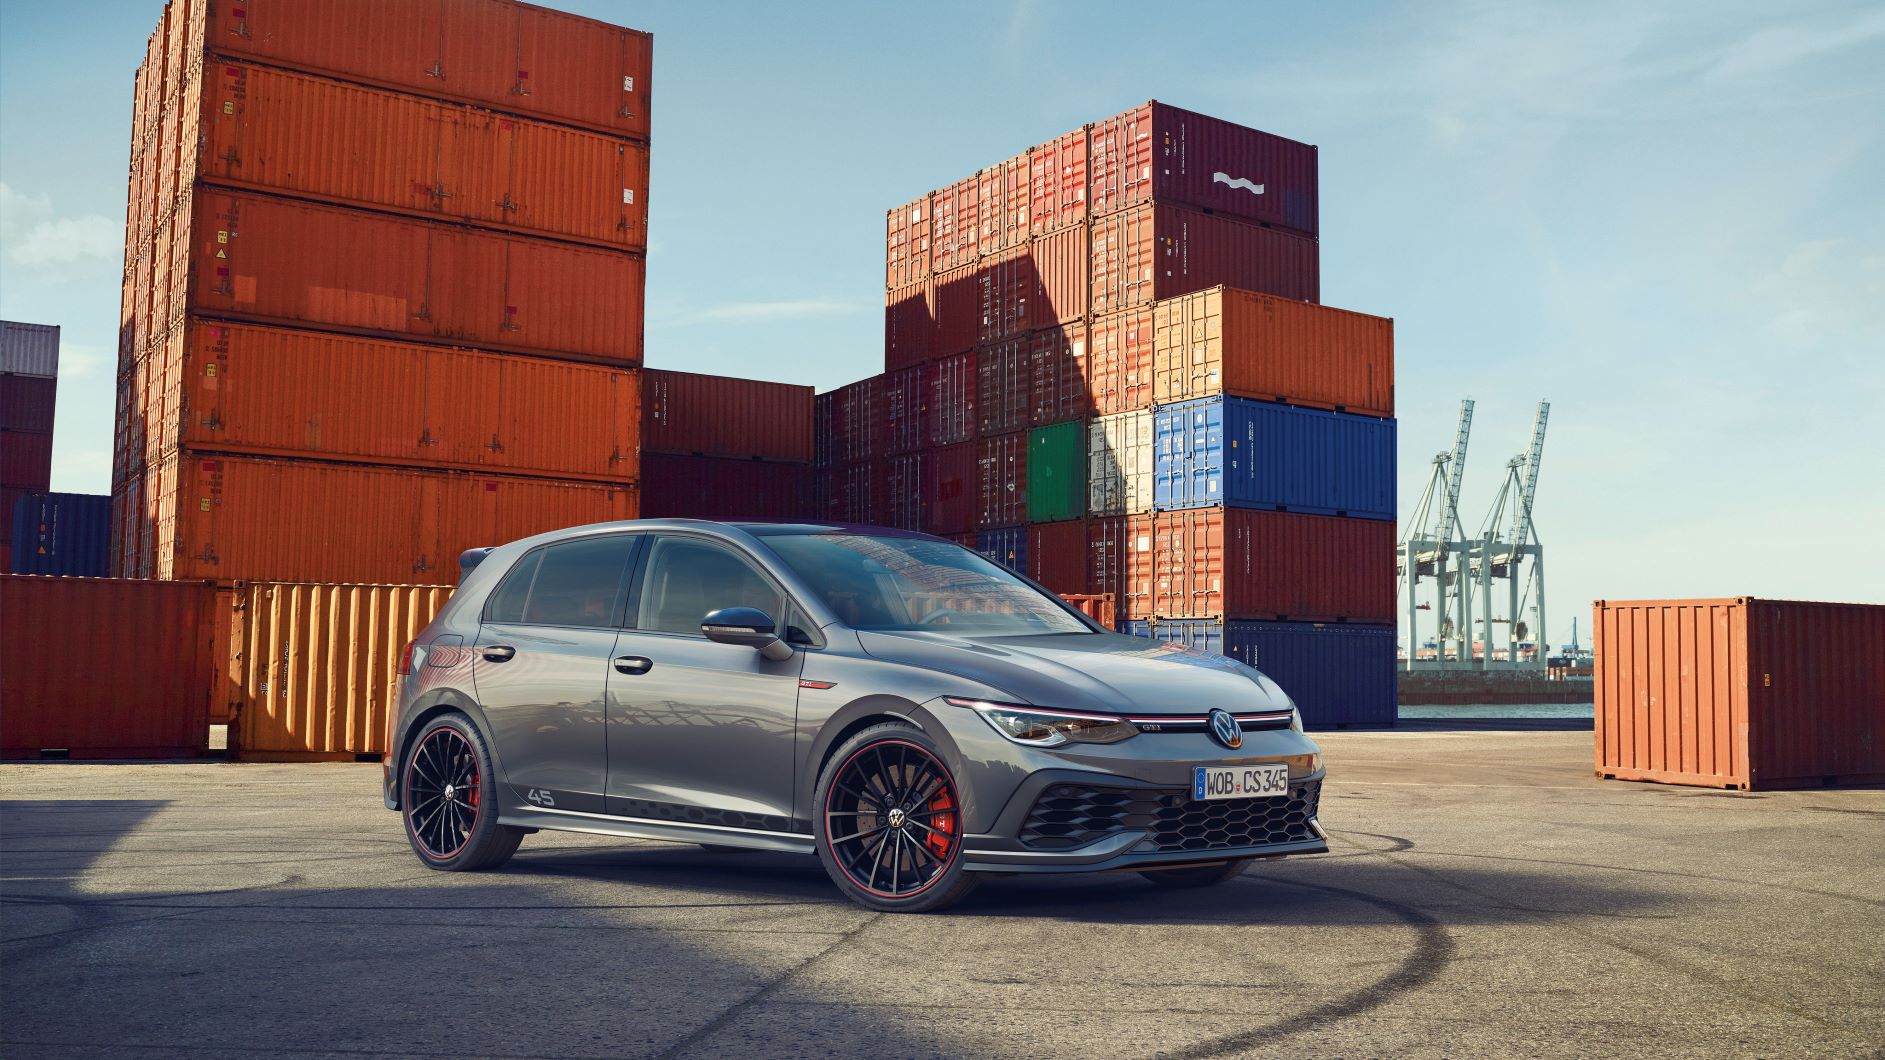 Exterior shot of the edition 45 VW Golf GTI